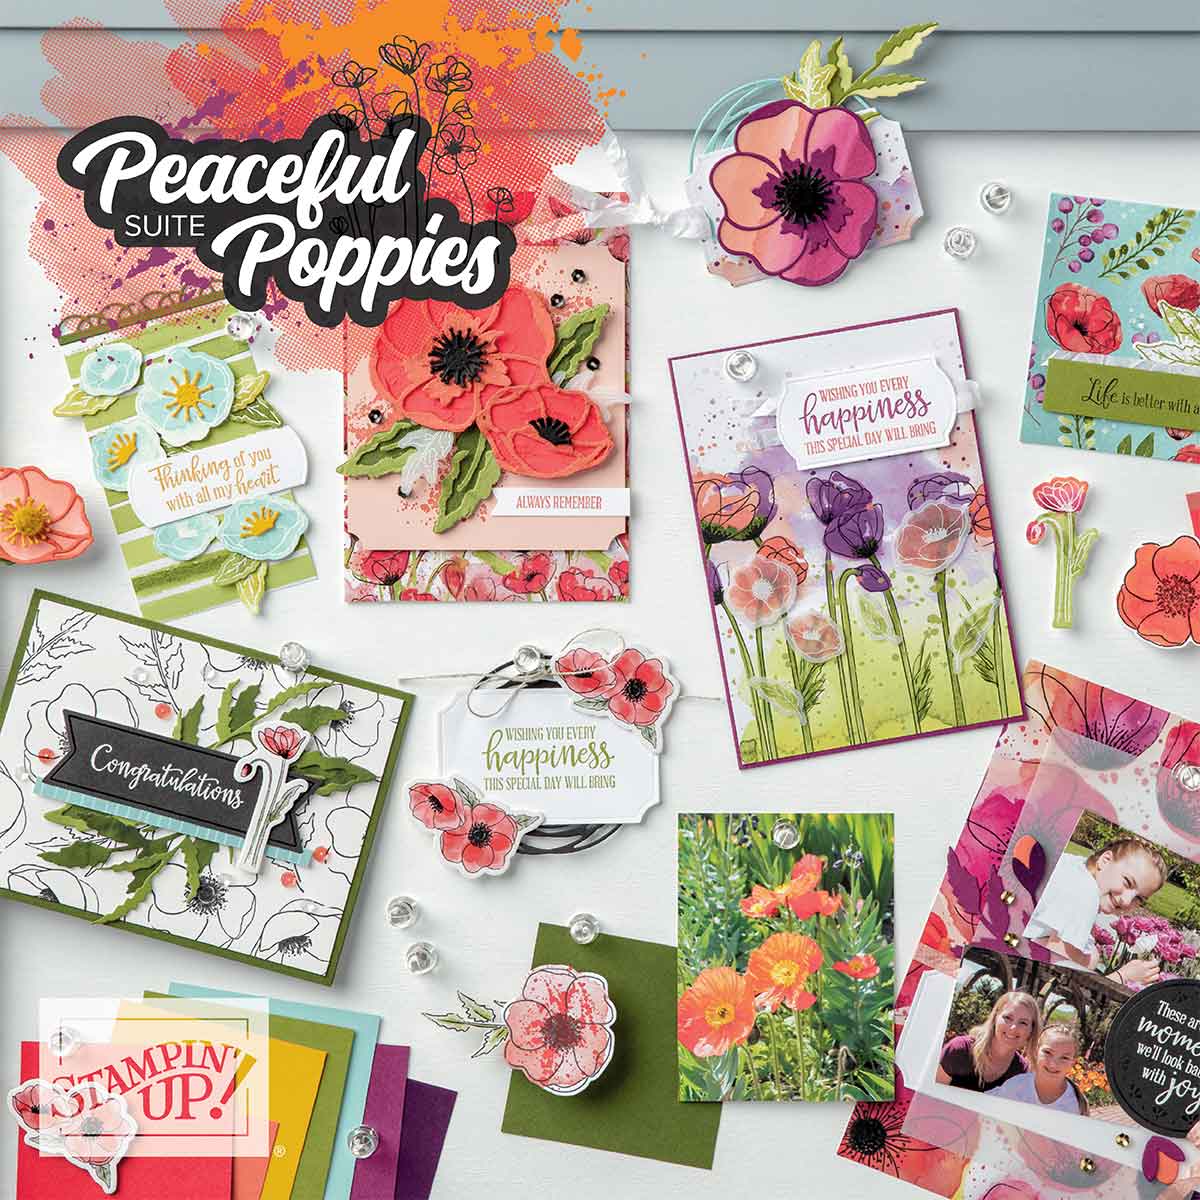 Cardmaking Classes Ash Vale Fleet Church Crookham and your place! Book in today! Pip Todman www.queenpipcards.com Stampin' Up! Independent Demonstrator UK 